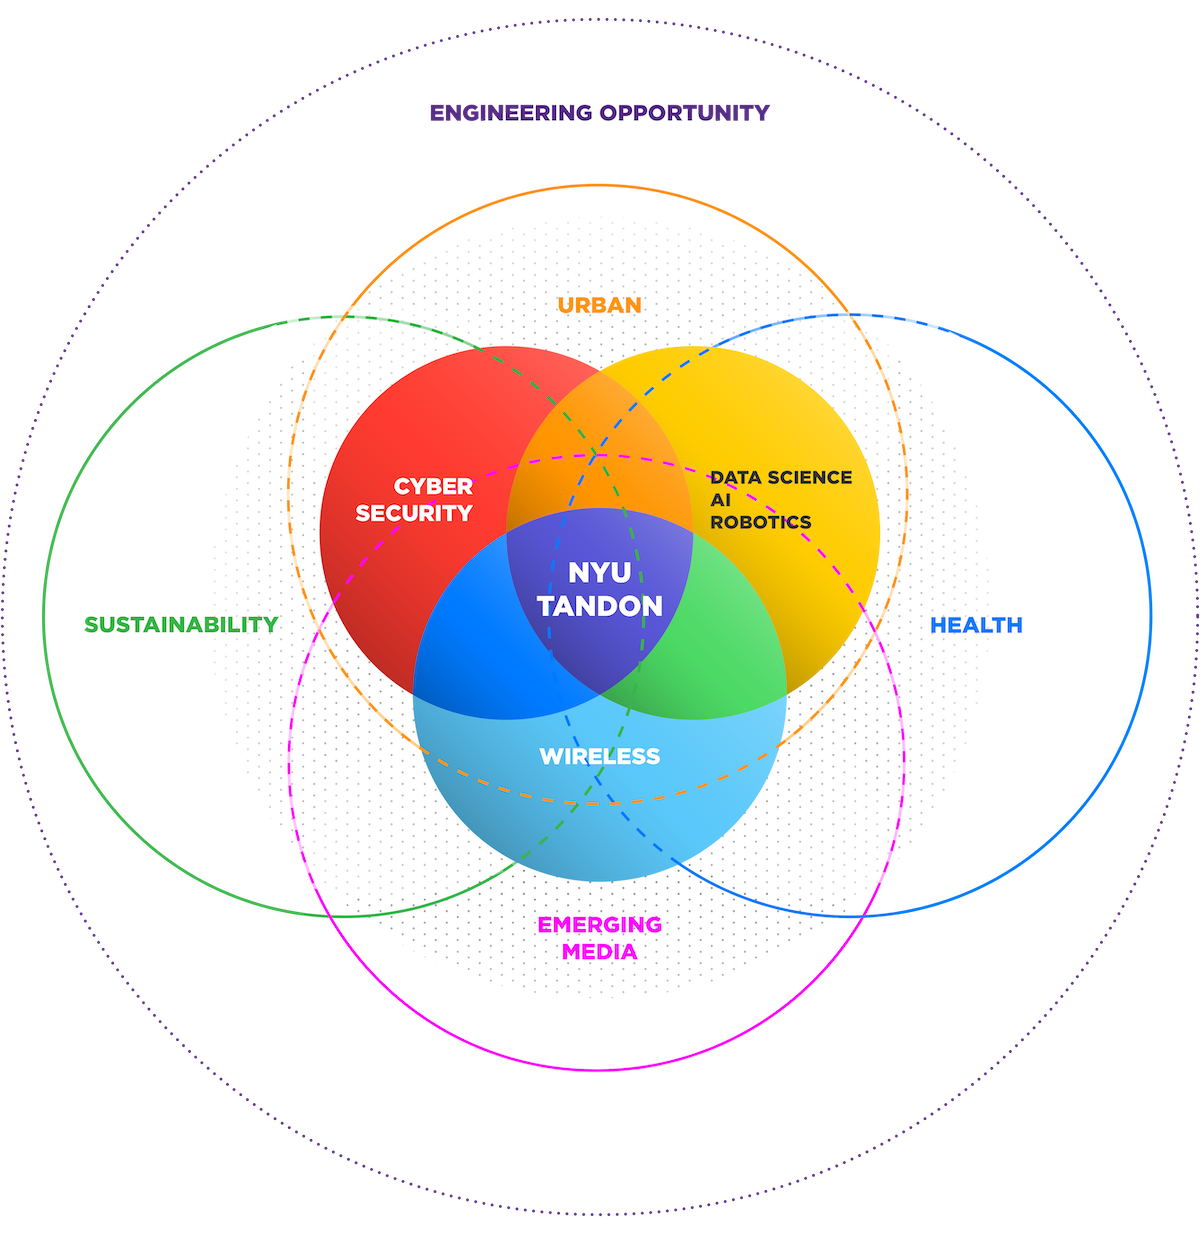 Areas of Excellence arranged in a venn diagram with NYU Tandon in the center